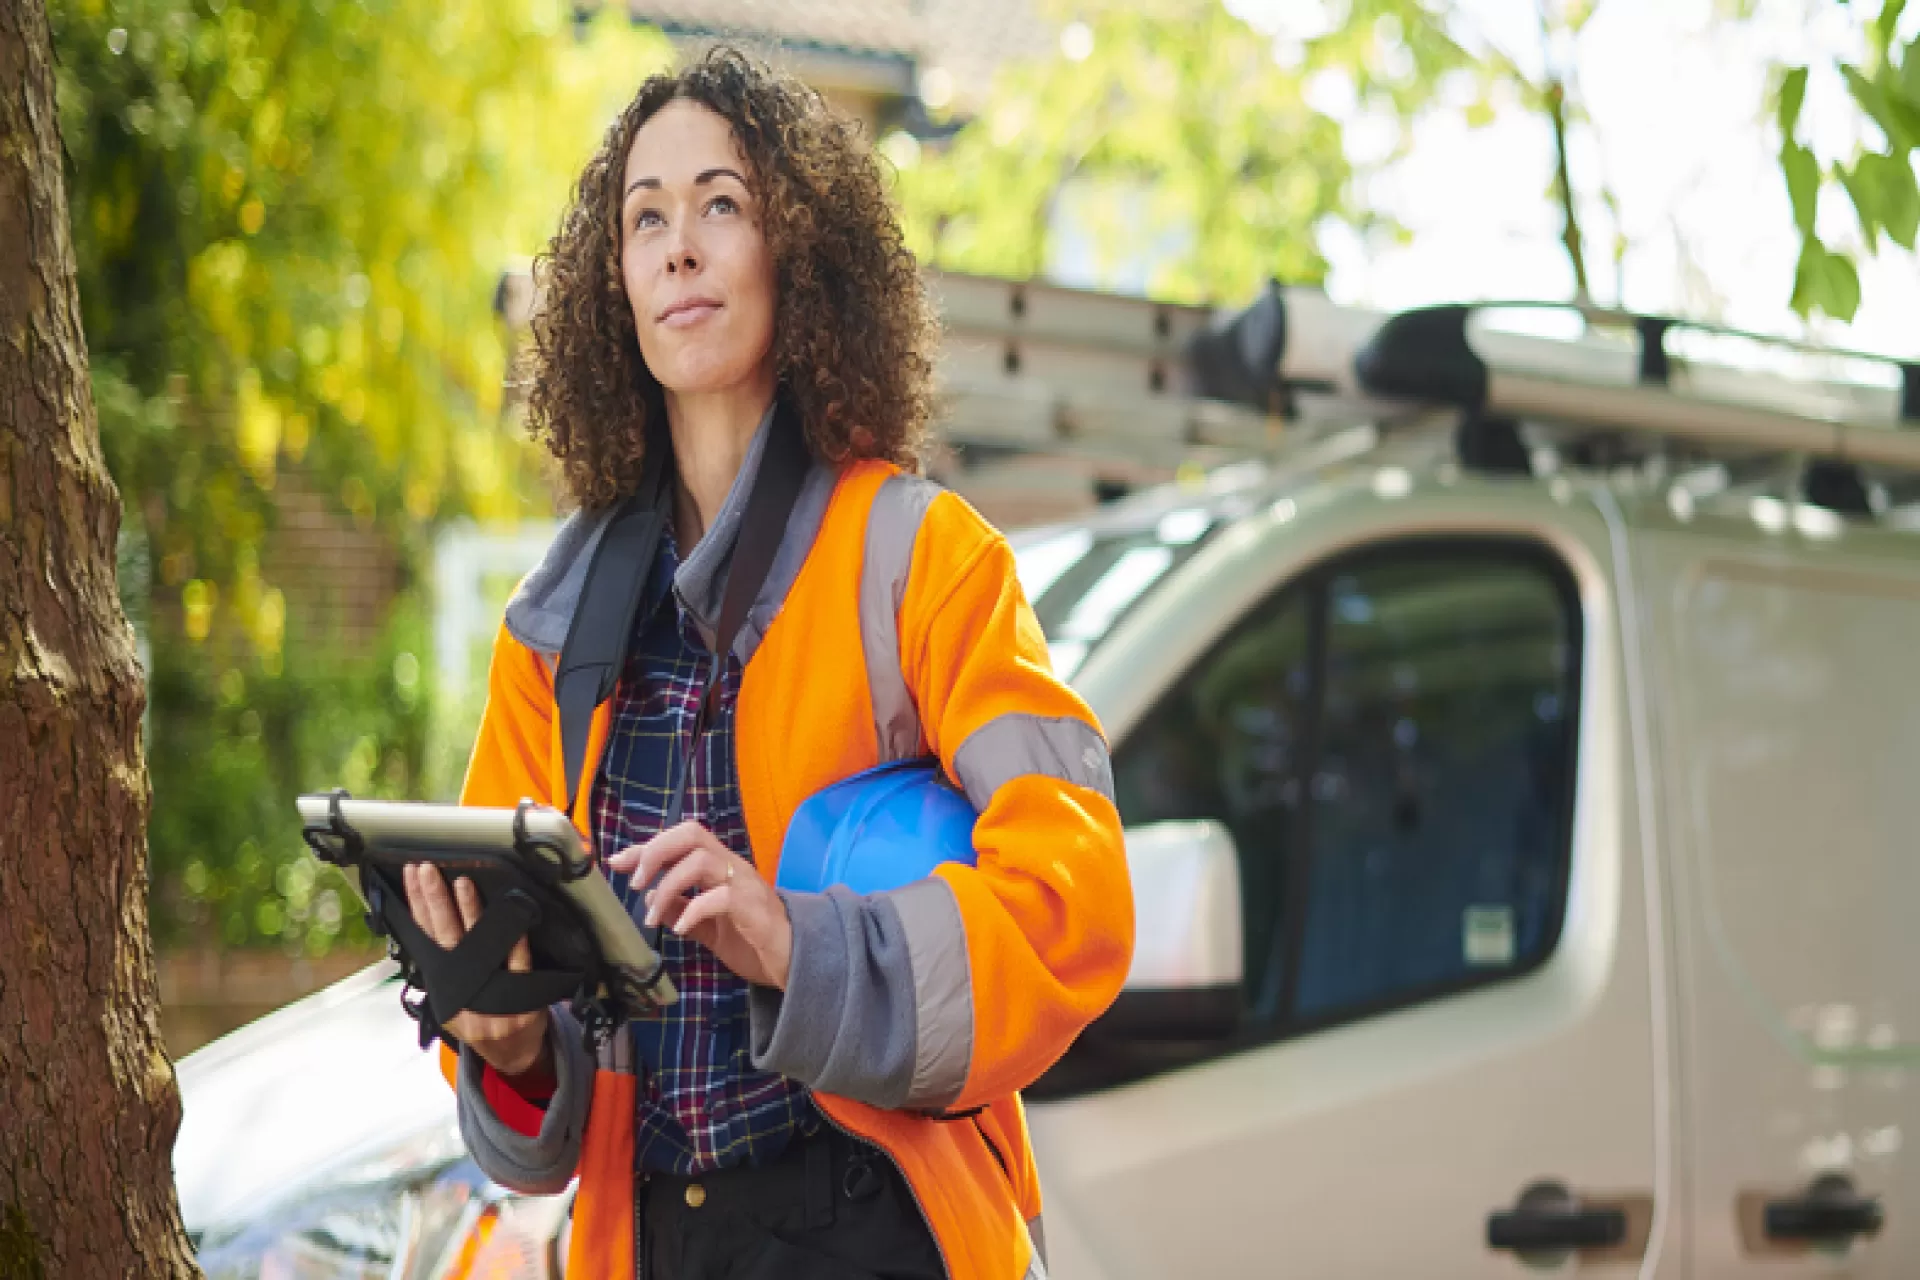 Reimagining Field Service Management systems for tomorrow's needs